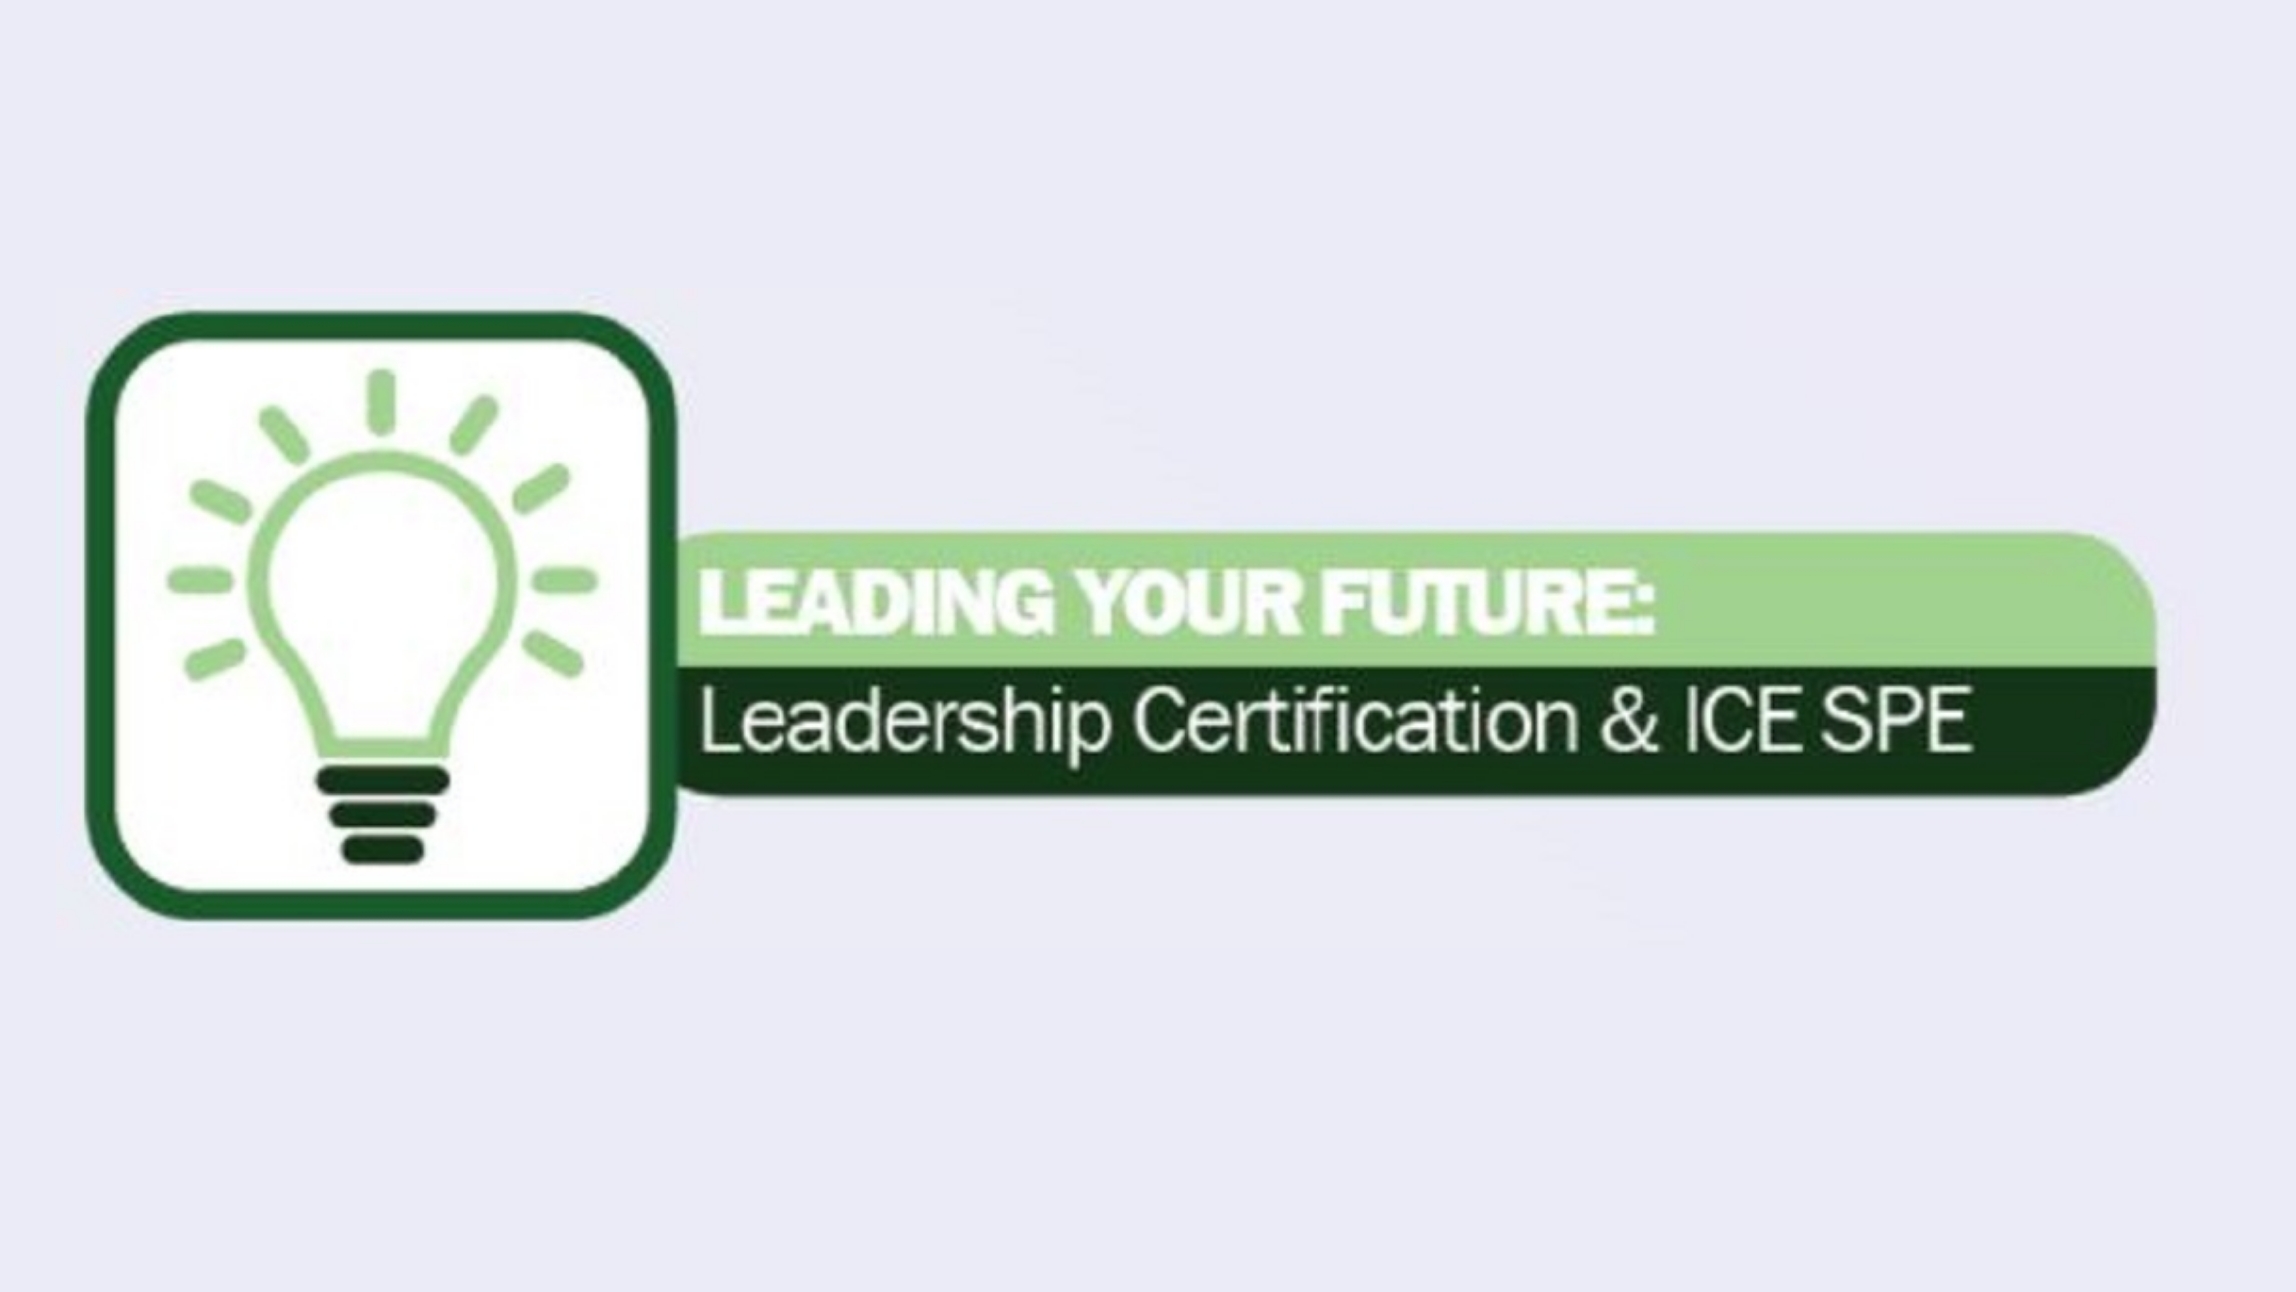 Leading Your Future: Leadership Certification